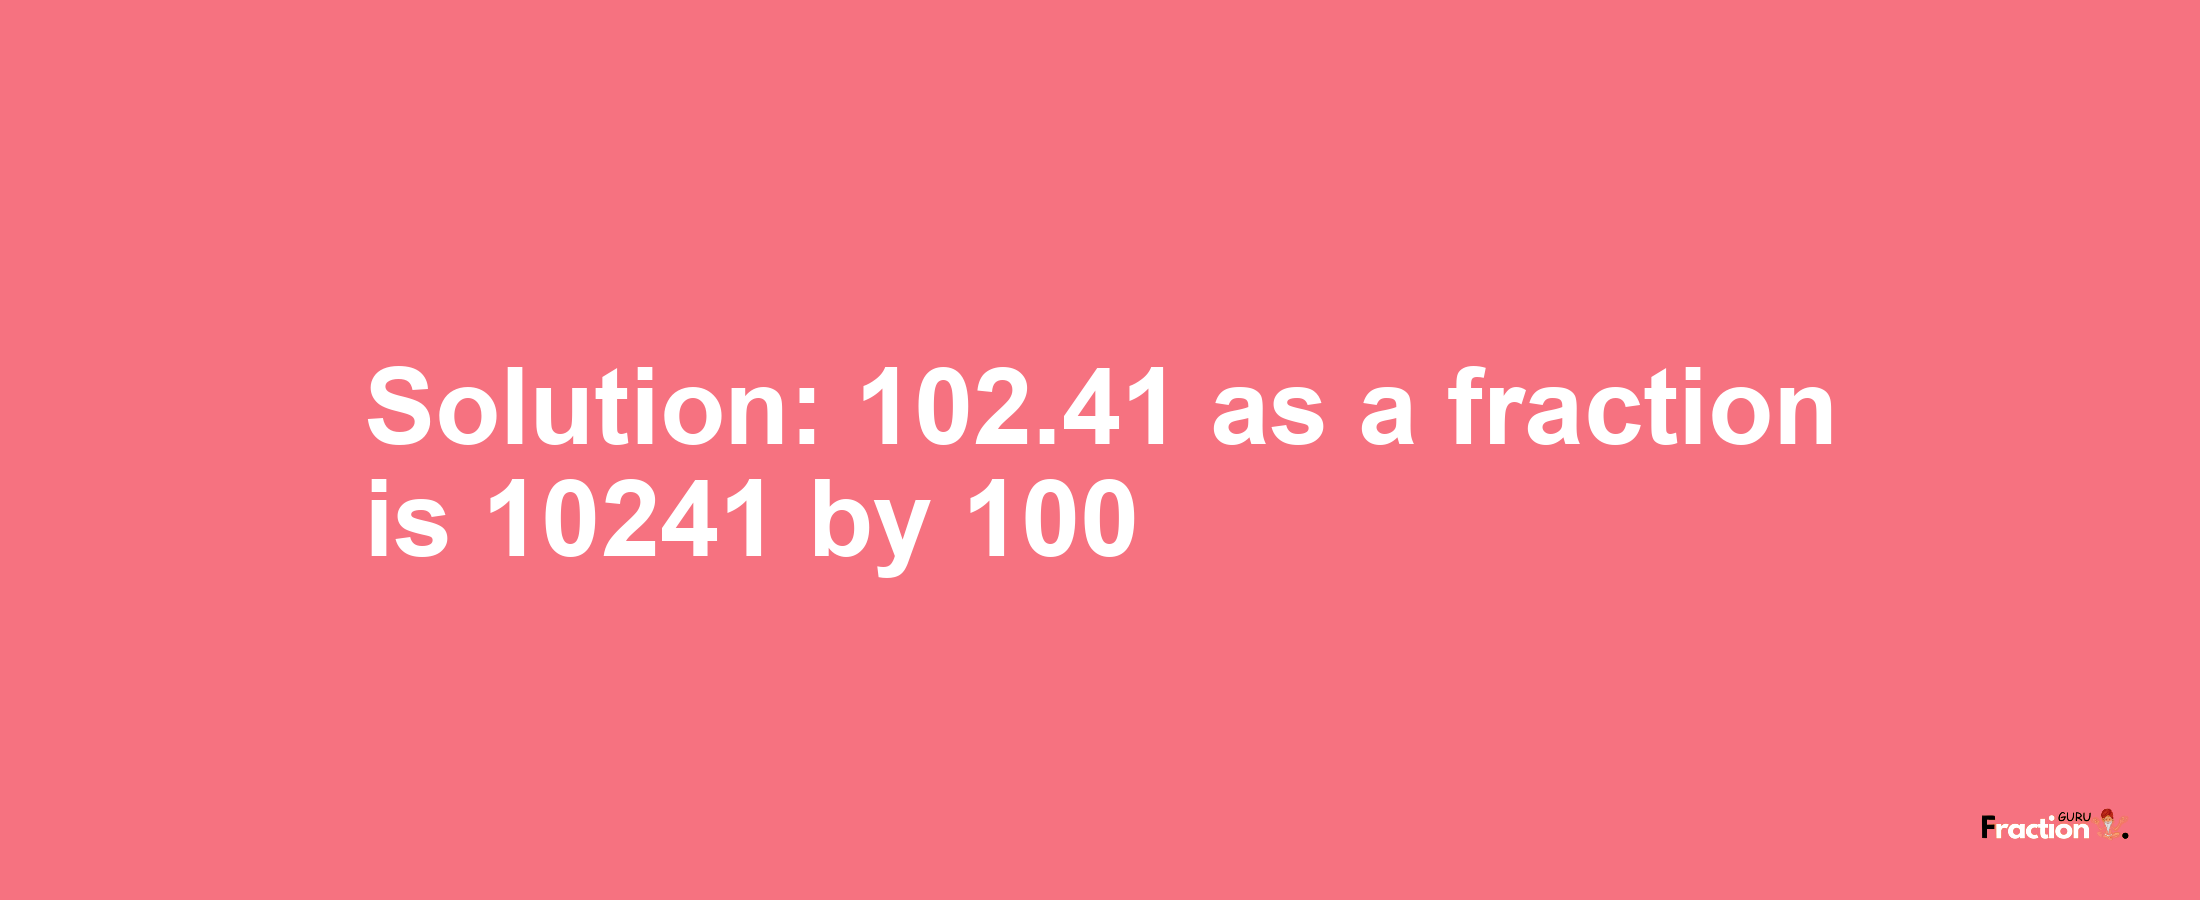 Solution:102.41 as a fraction is 10241/100